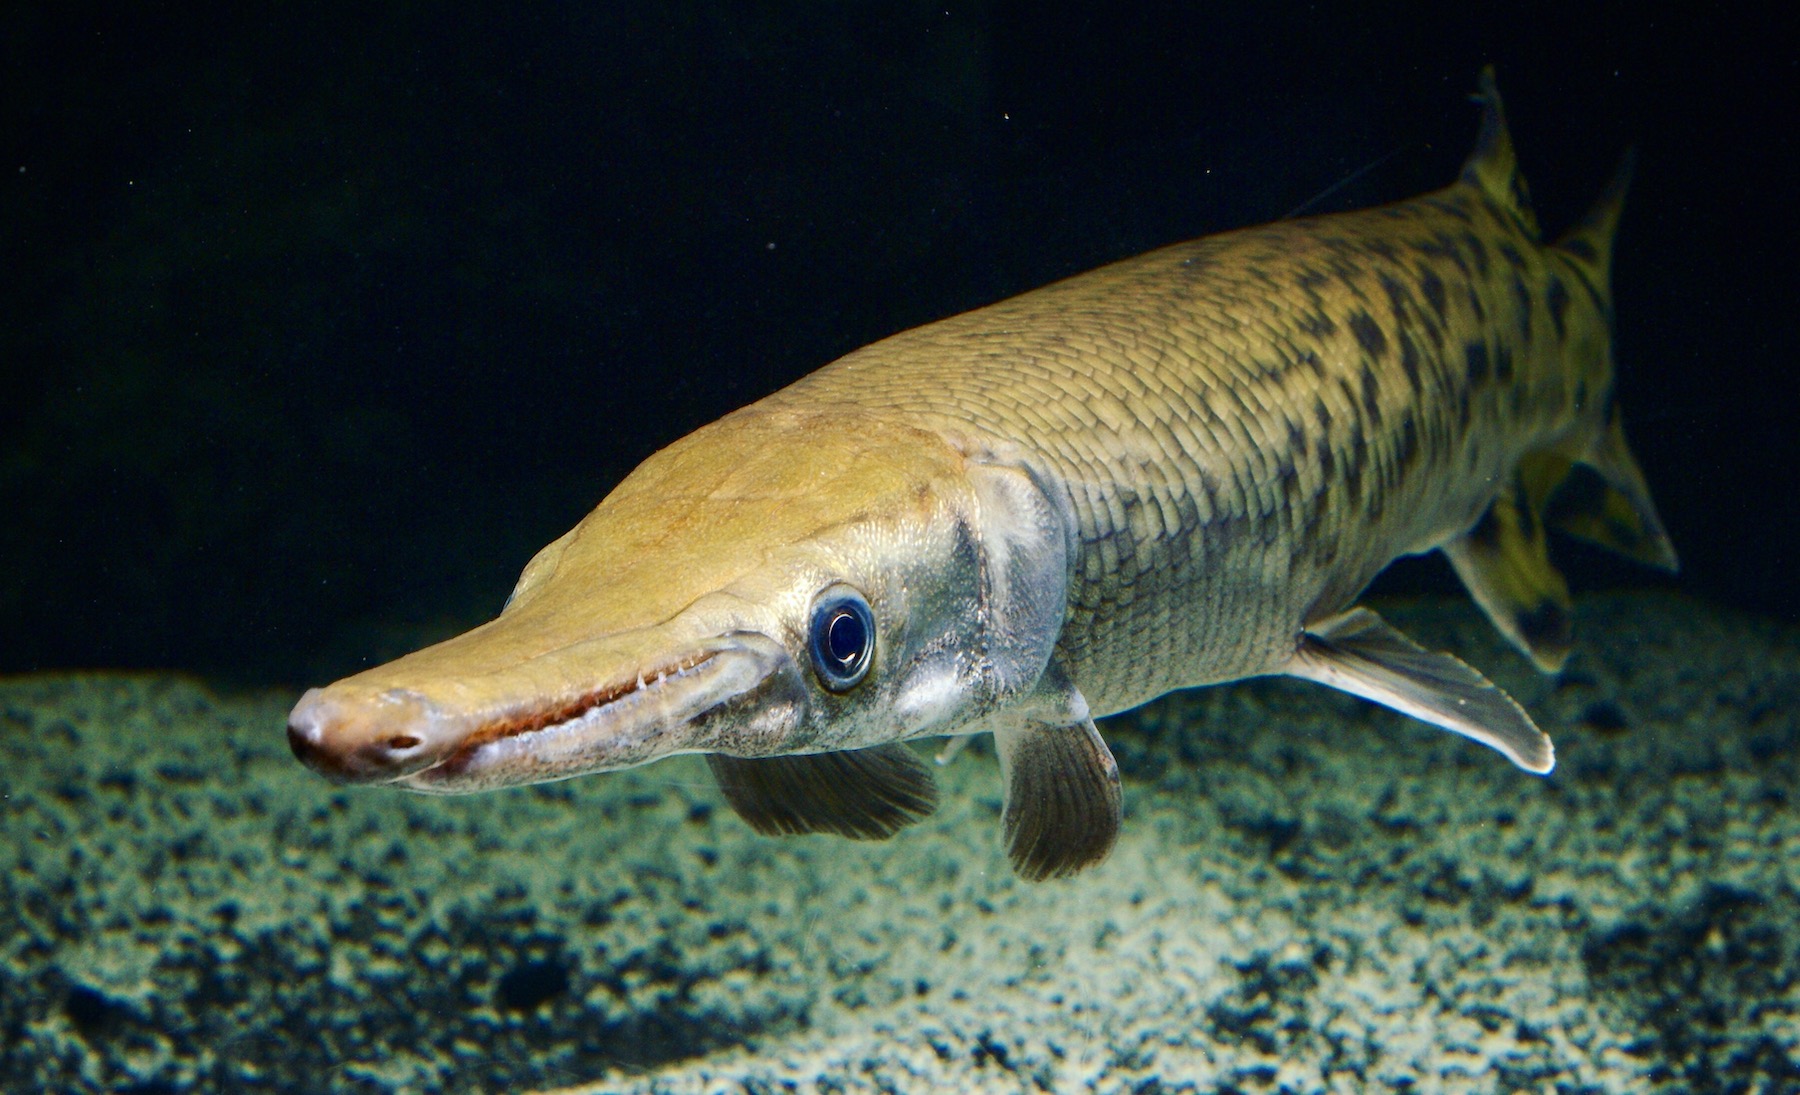 A long-nosed fish with teeth swimming. It almost looks as if it's smiling.